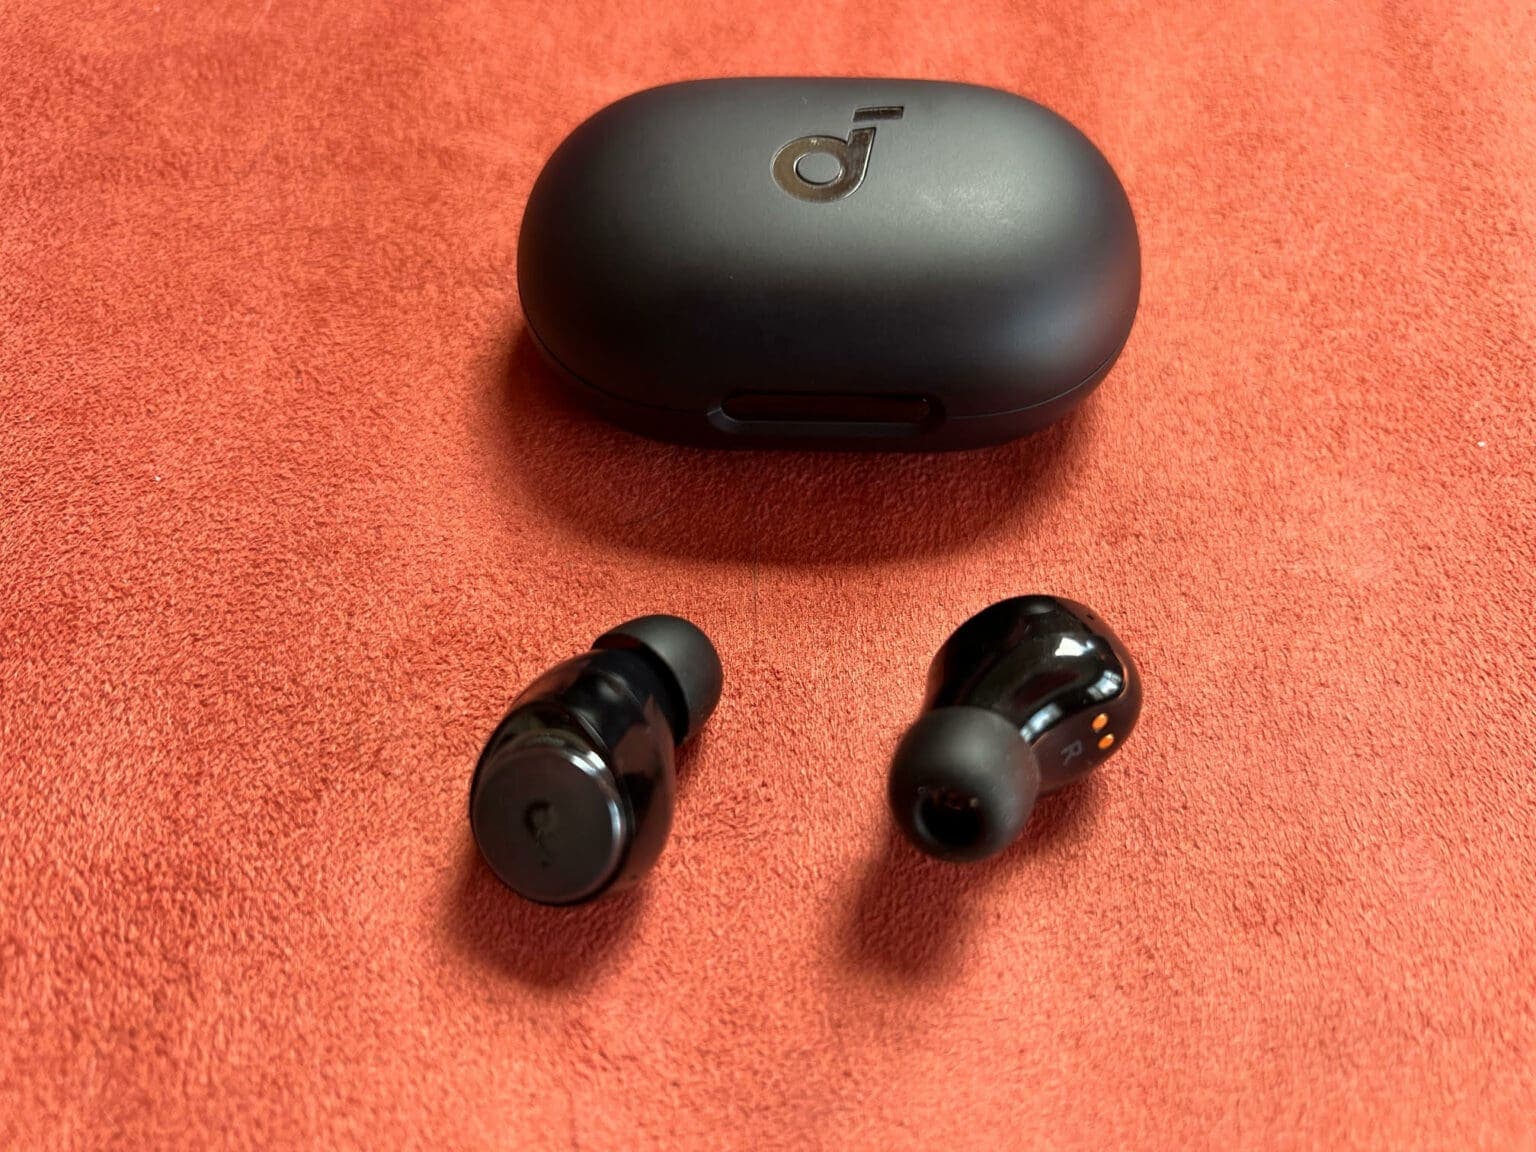 Soundcore A40 wireless ANC earbuds sound great, but their noise cancellation is epic.